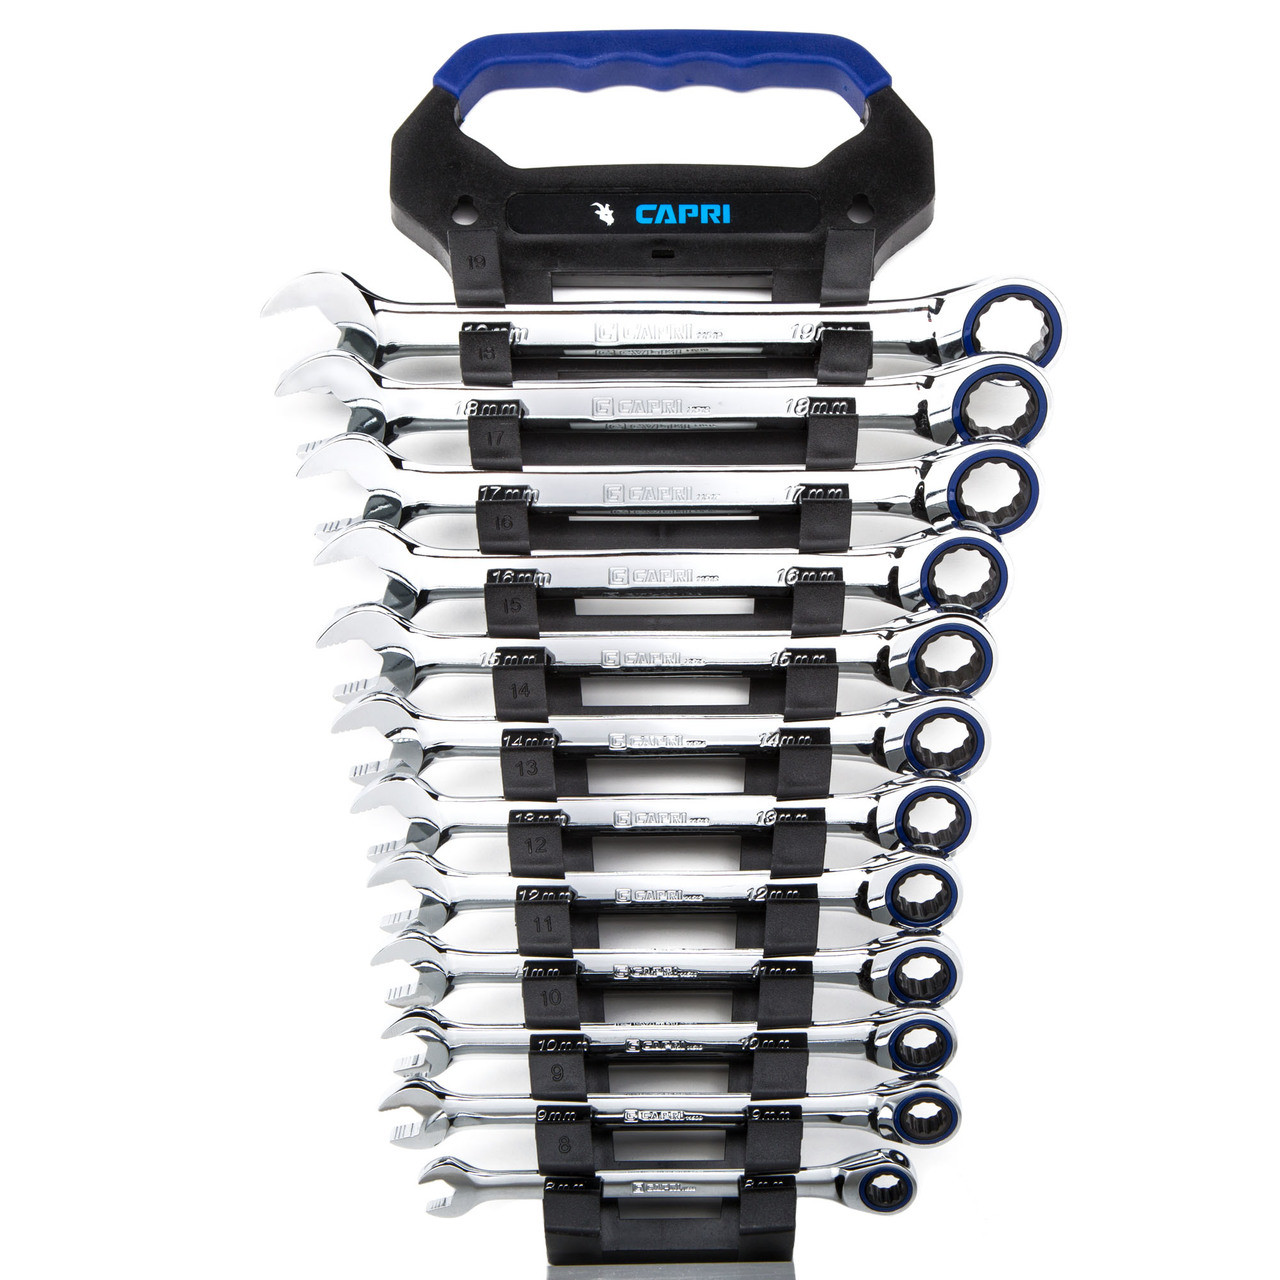 Capri Tools Ratcheting Combination Wrench Set, True 100-Tooth, 3.6-Degree Swing Arc, 8 to 19 mm, Metric, 12-Piece in a Convenient Wrench Rack